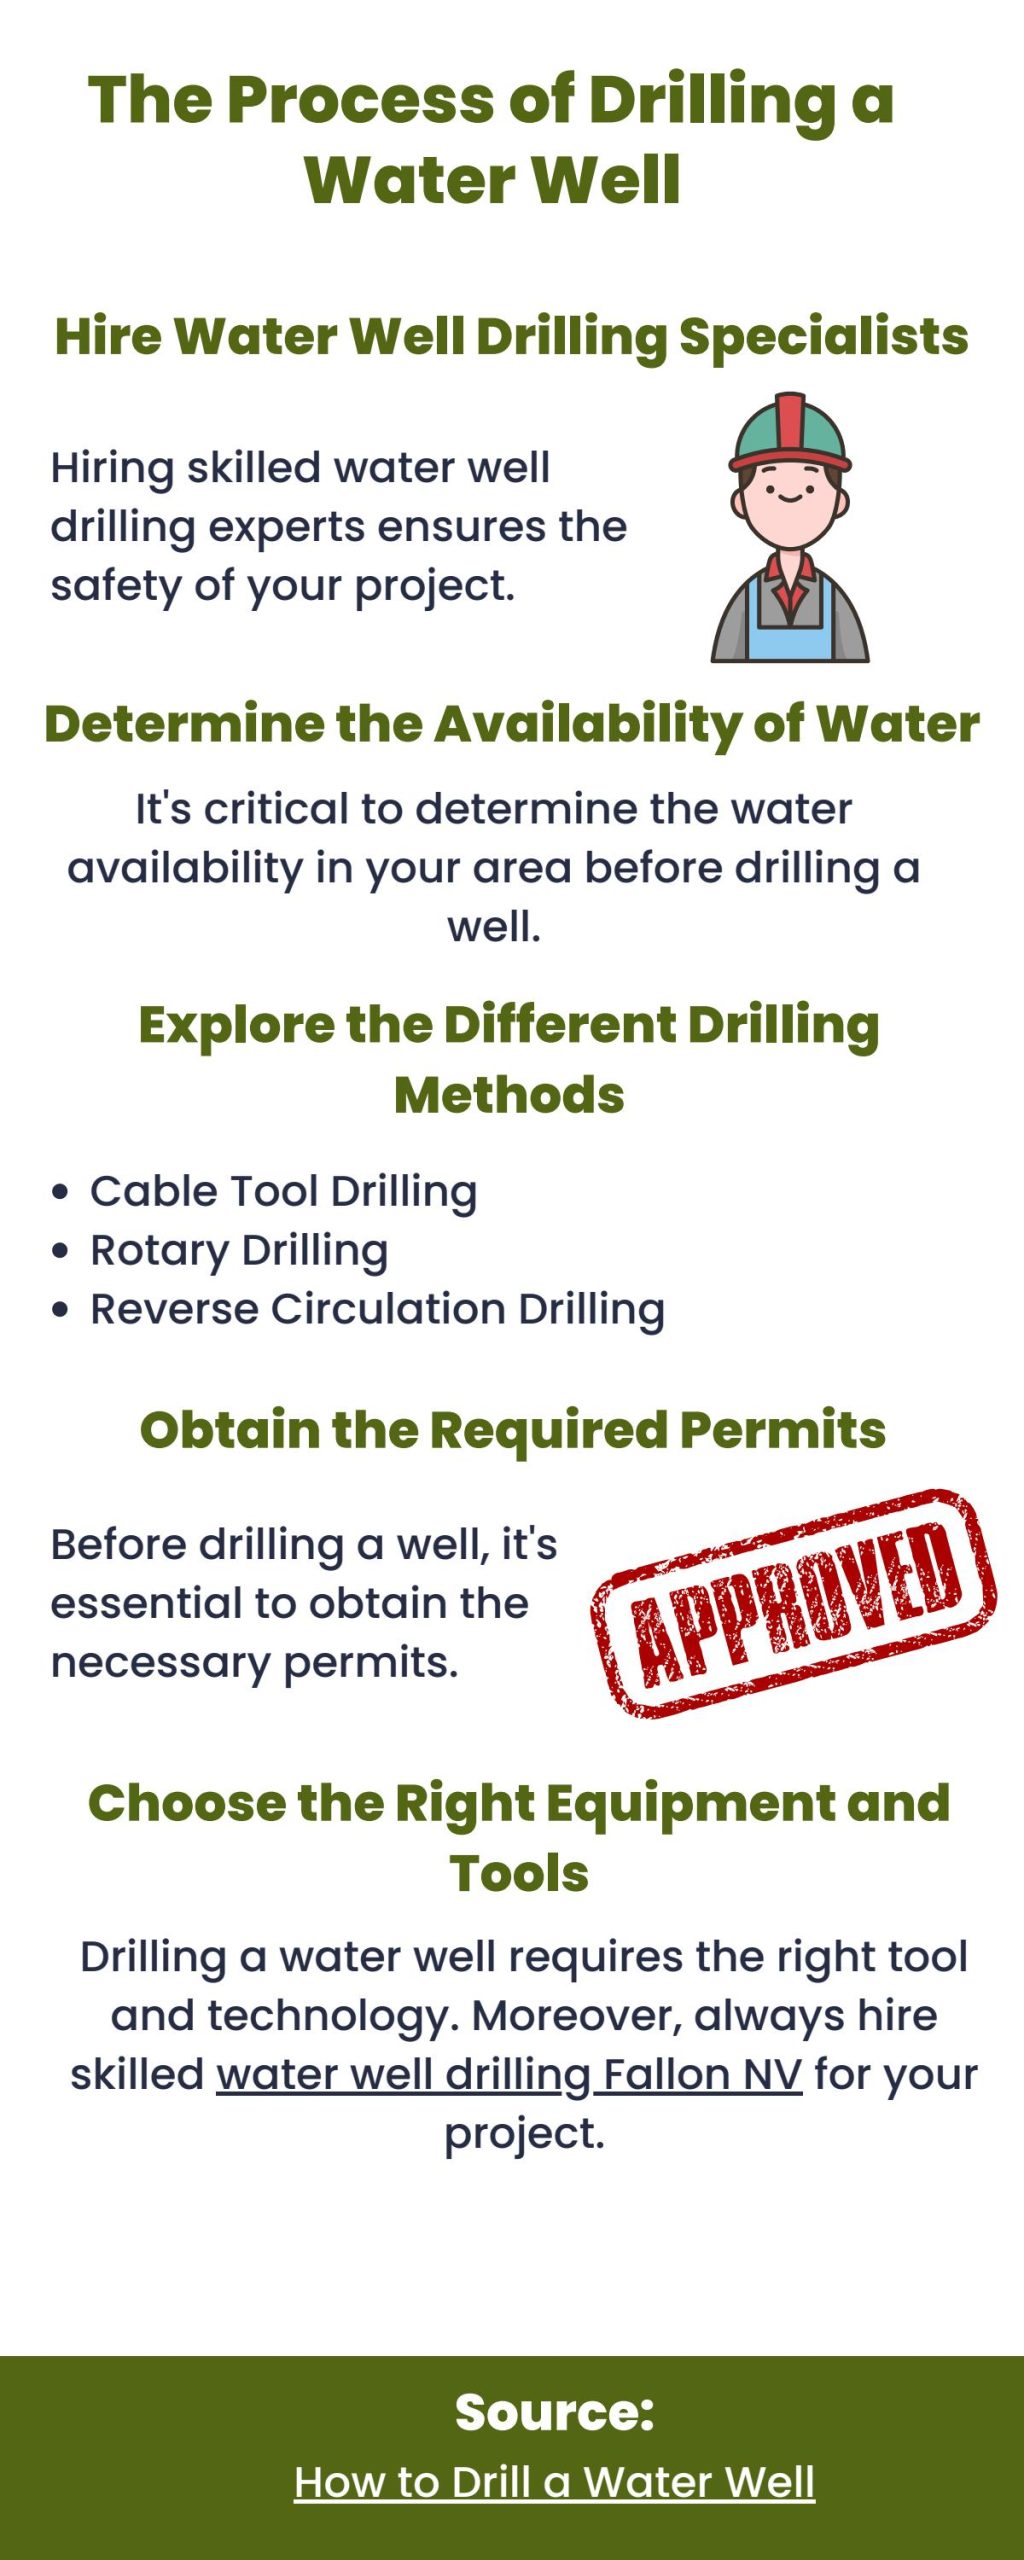 Steps For Drilling a Water Well